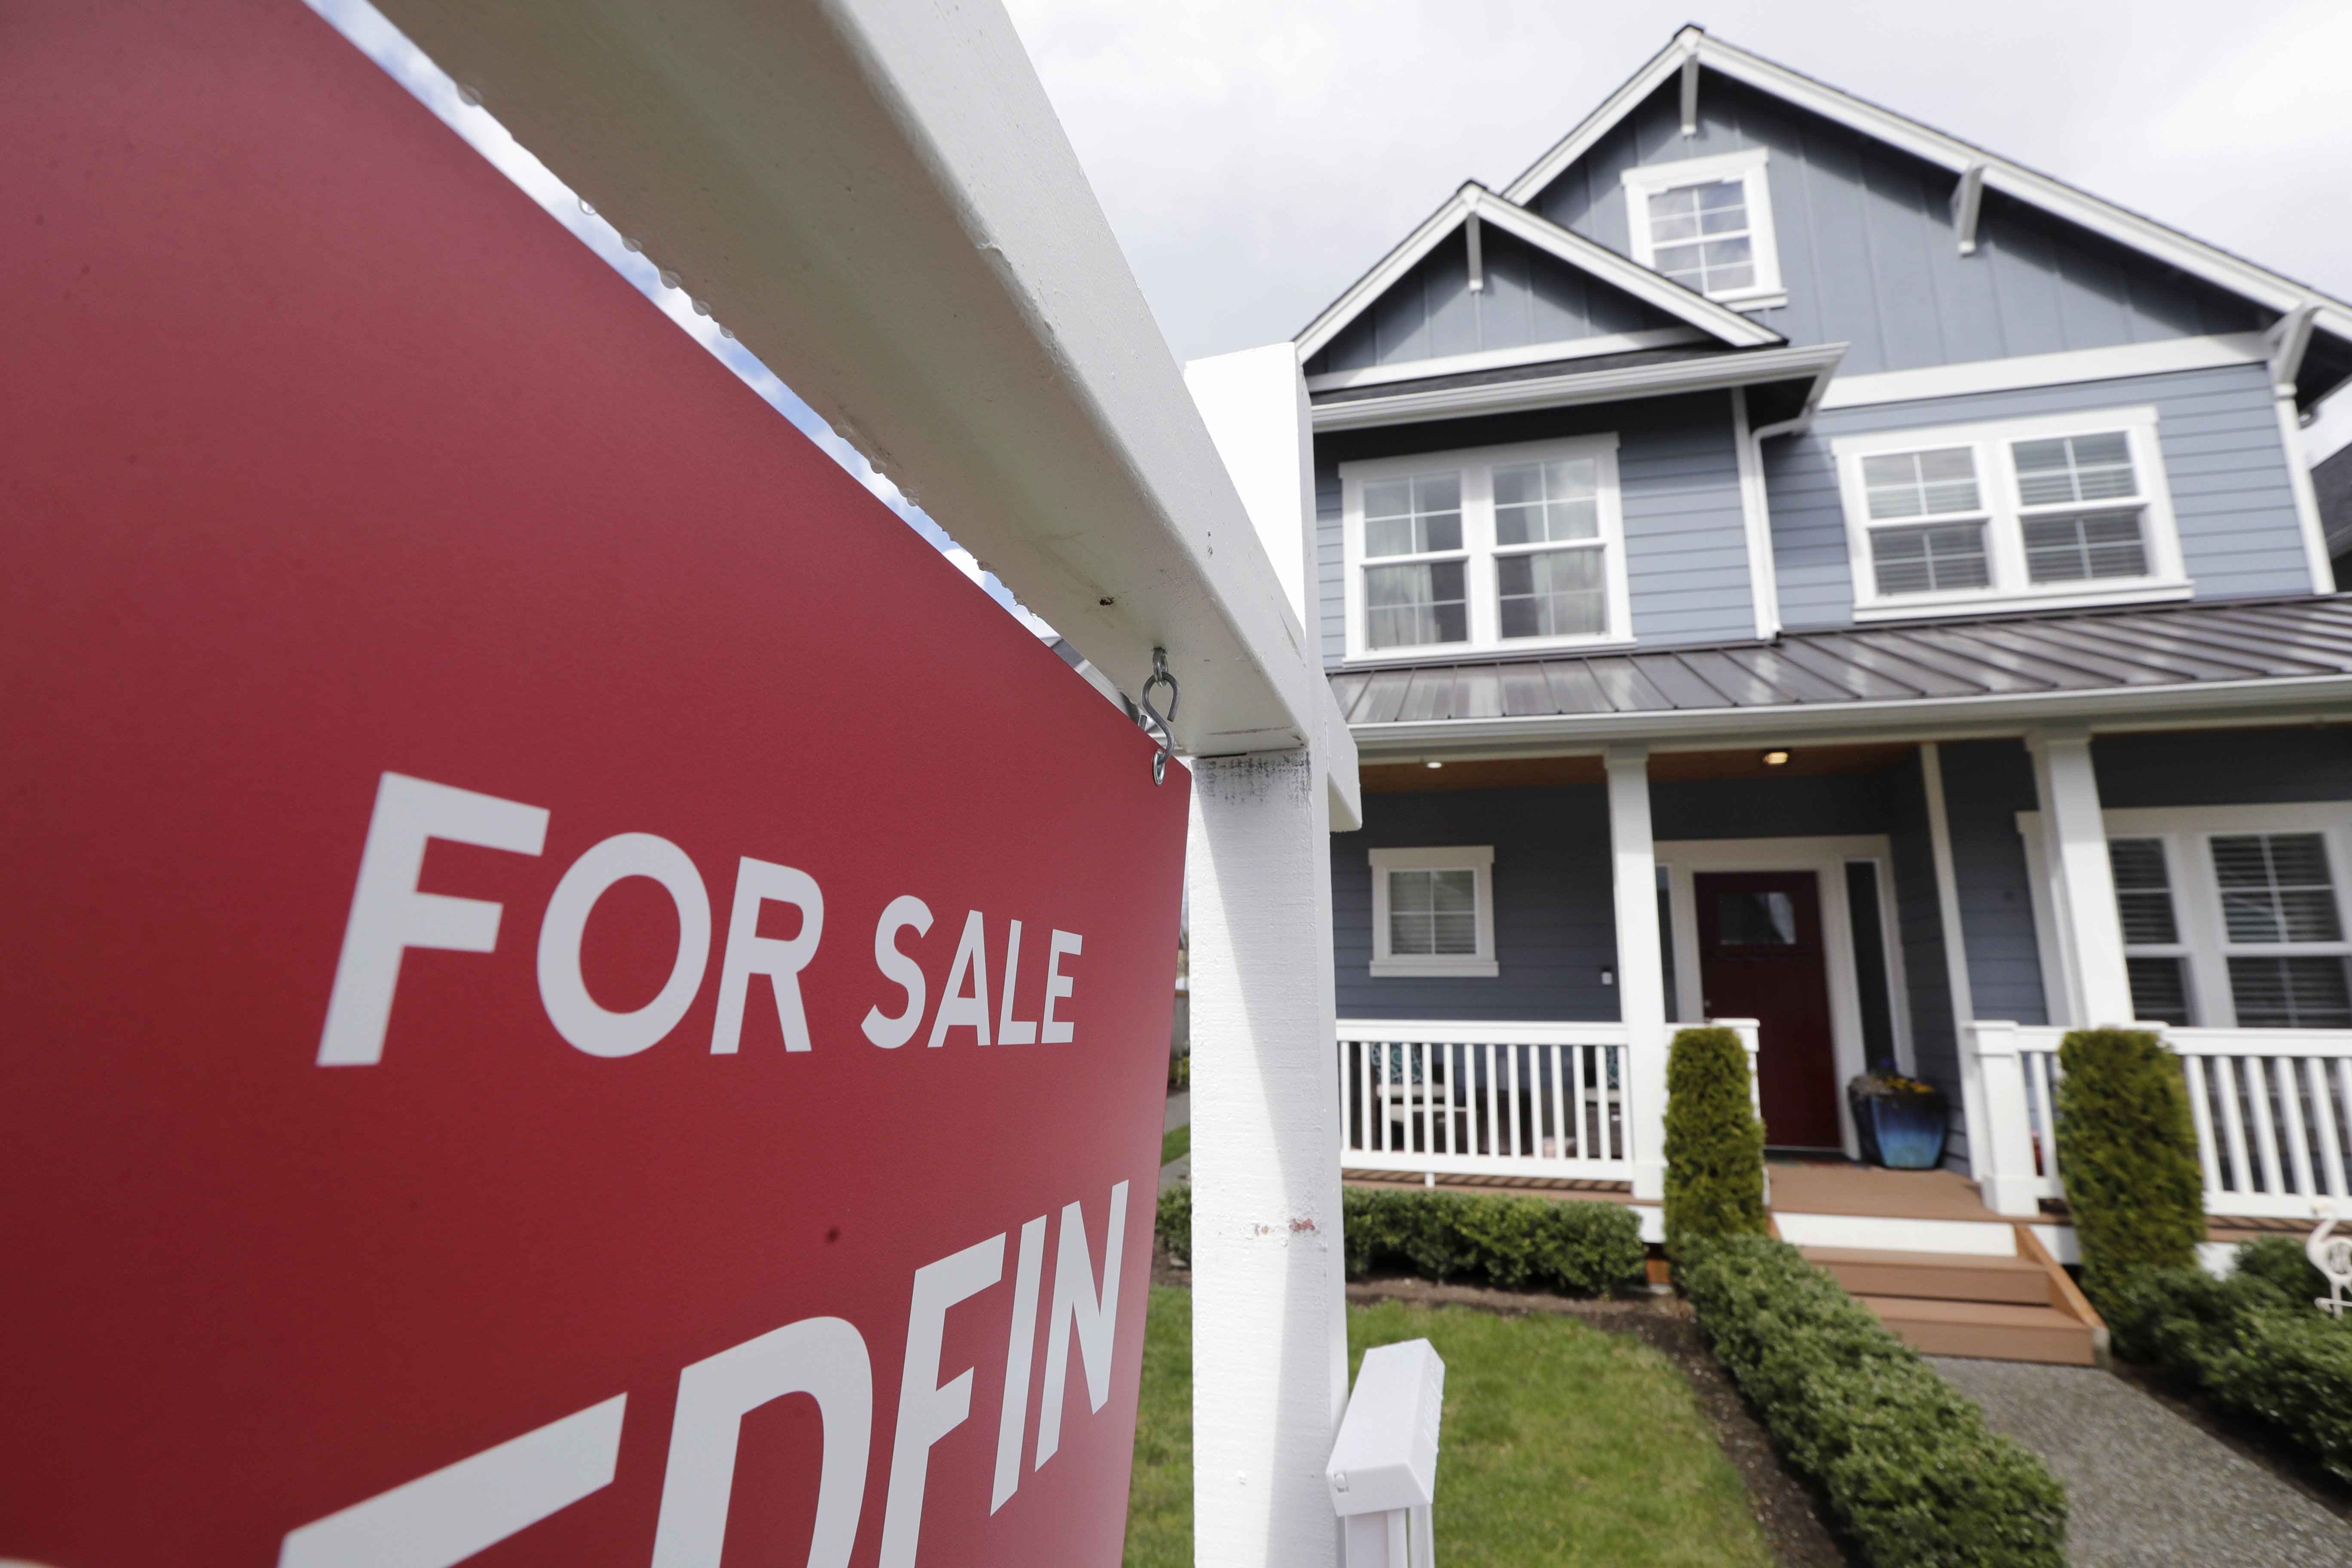 Too hot? Sky-high prices may be scaring some buyers away from the housing  market - The Boston Globe